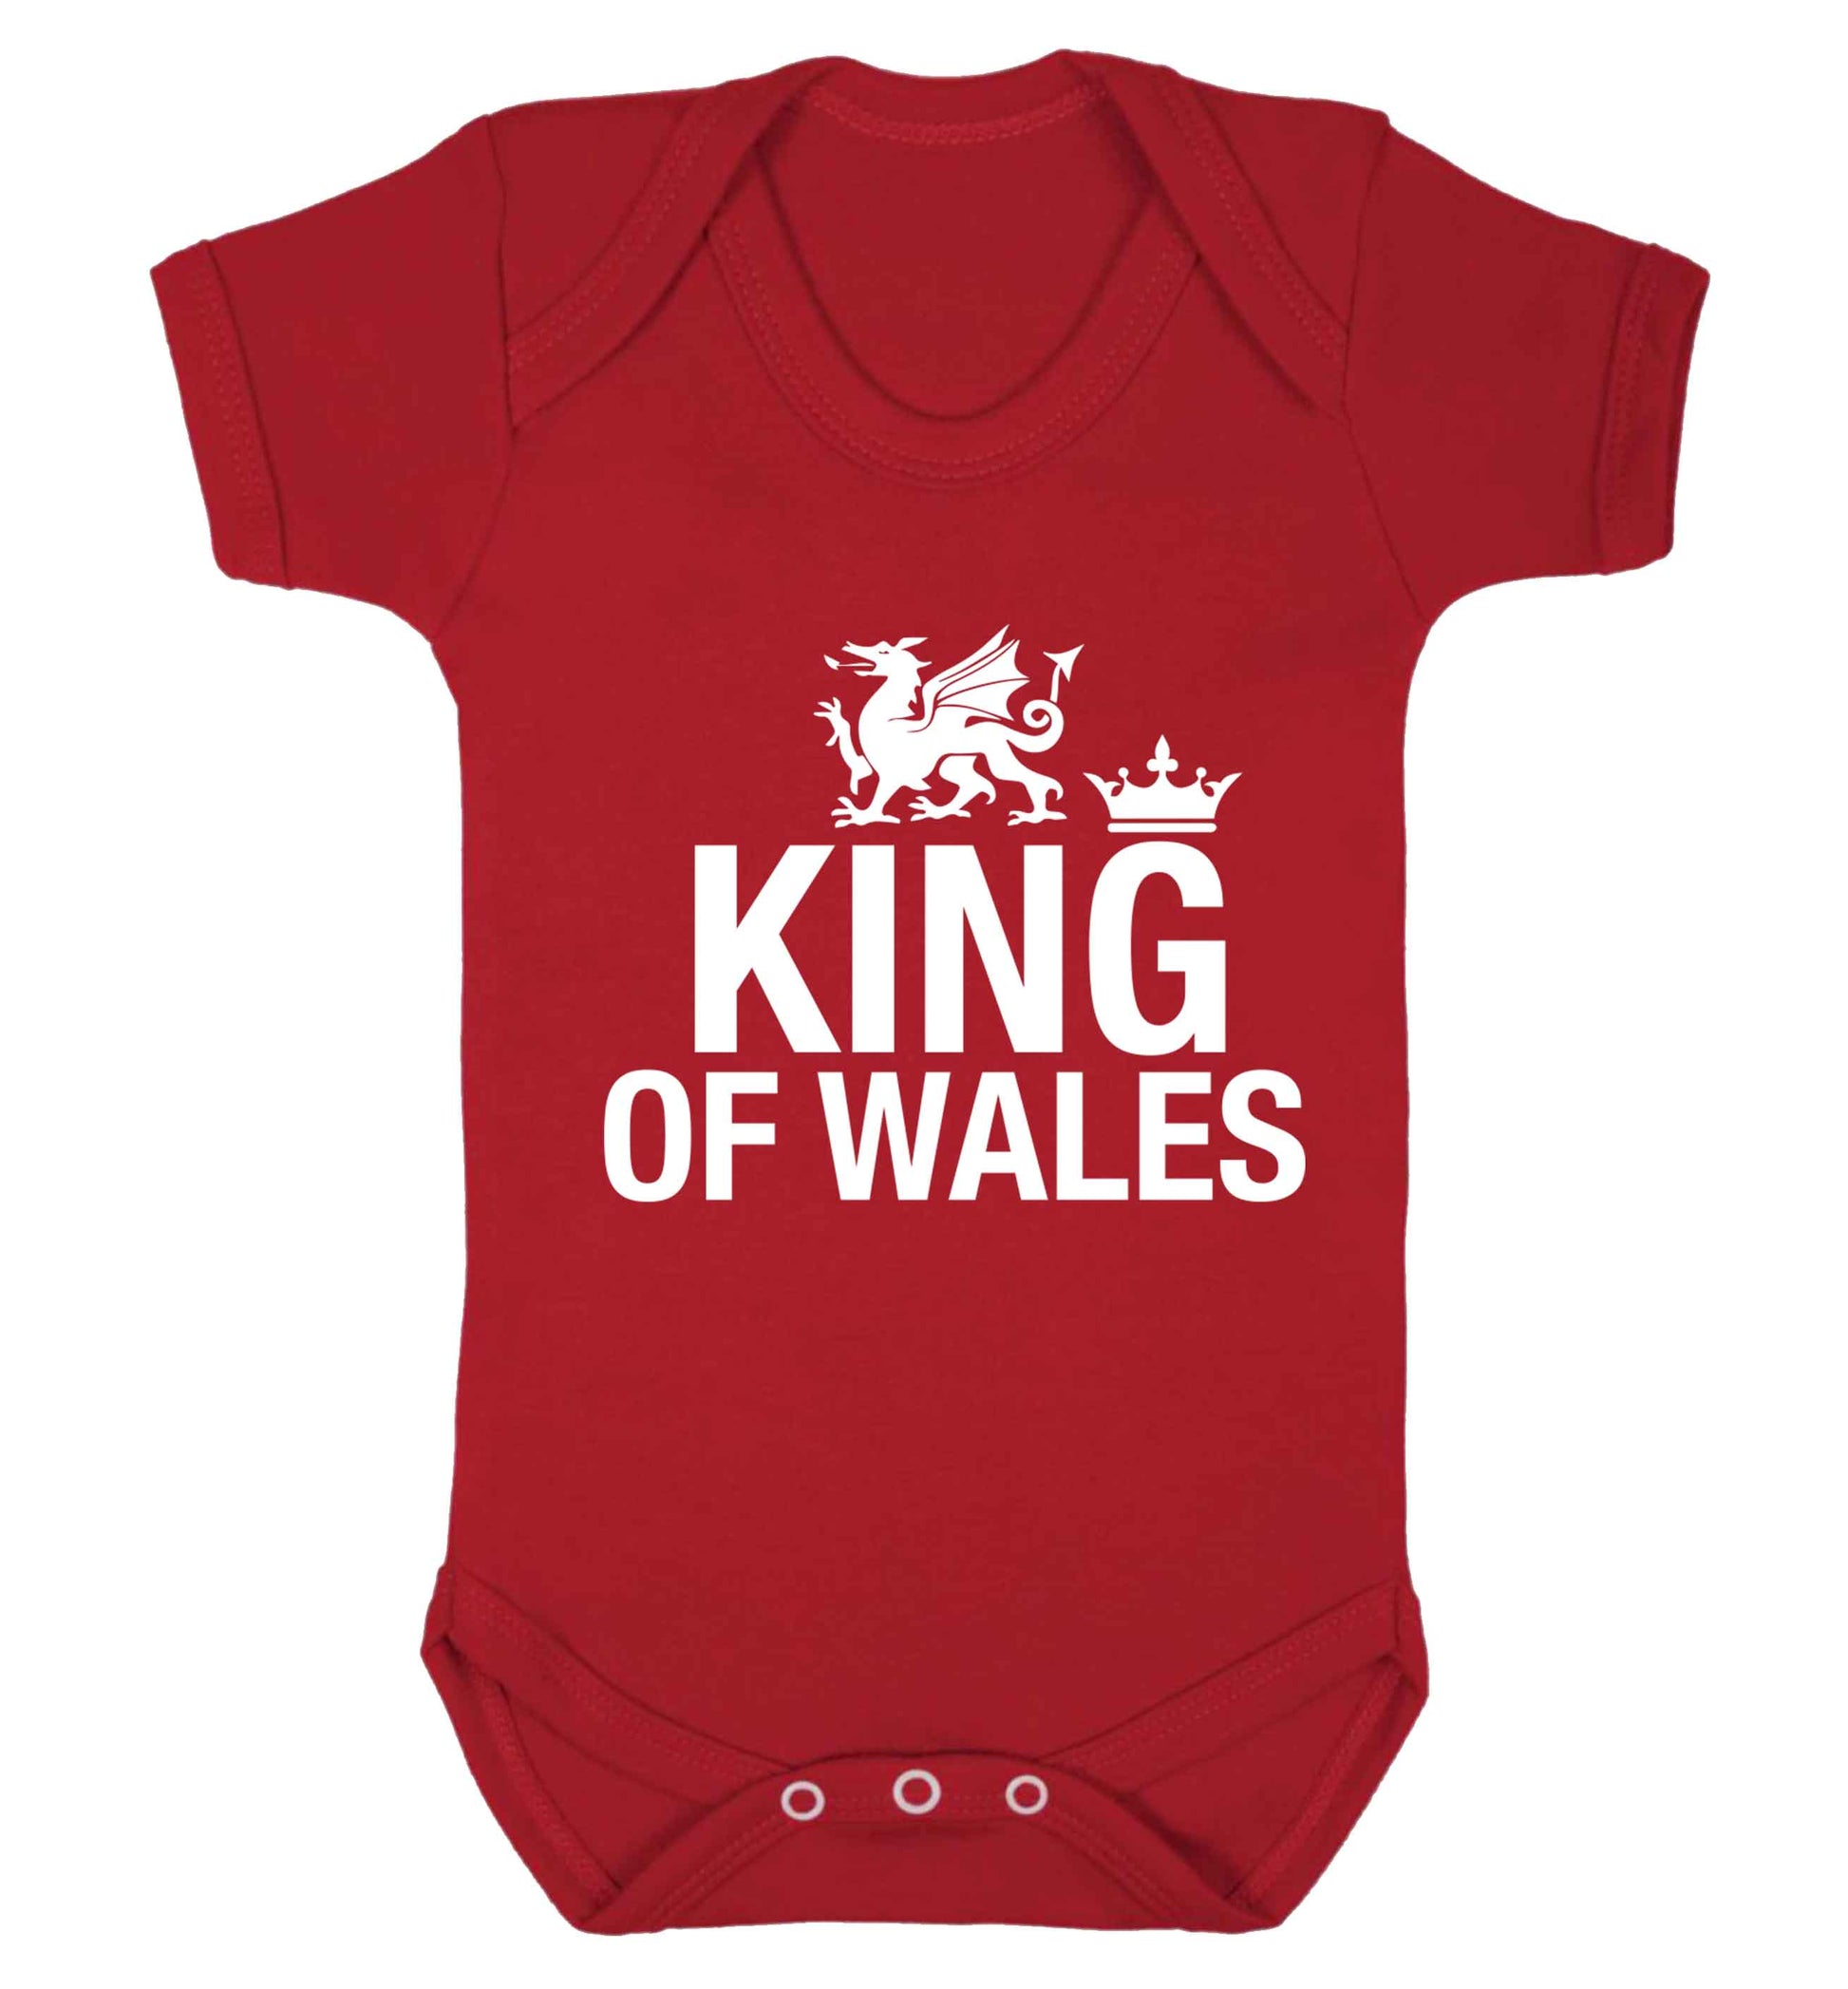 King of Wales Baby Vest red 18-24 months